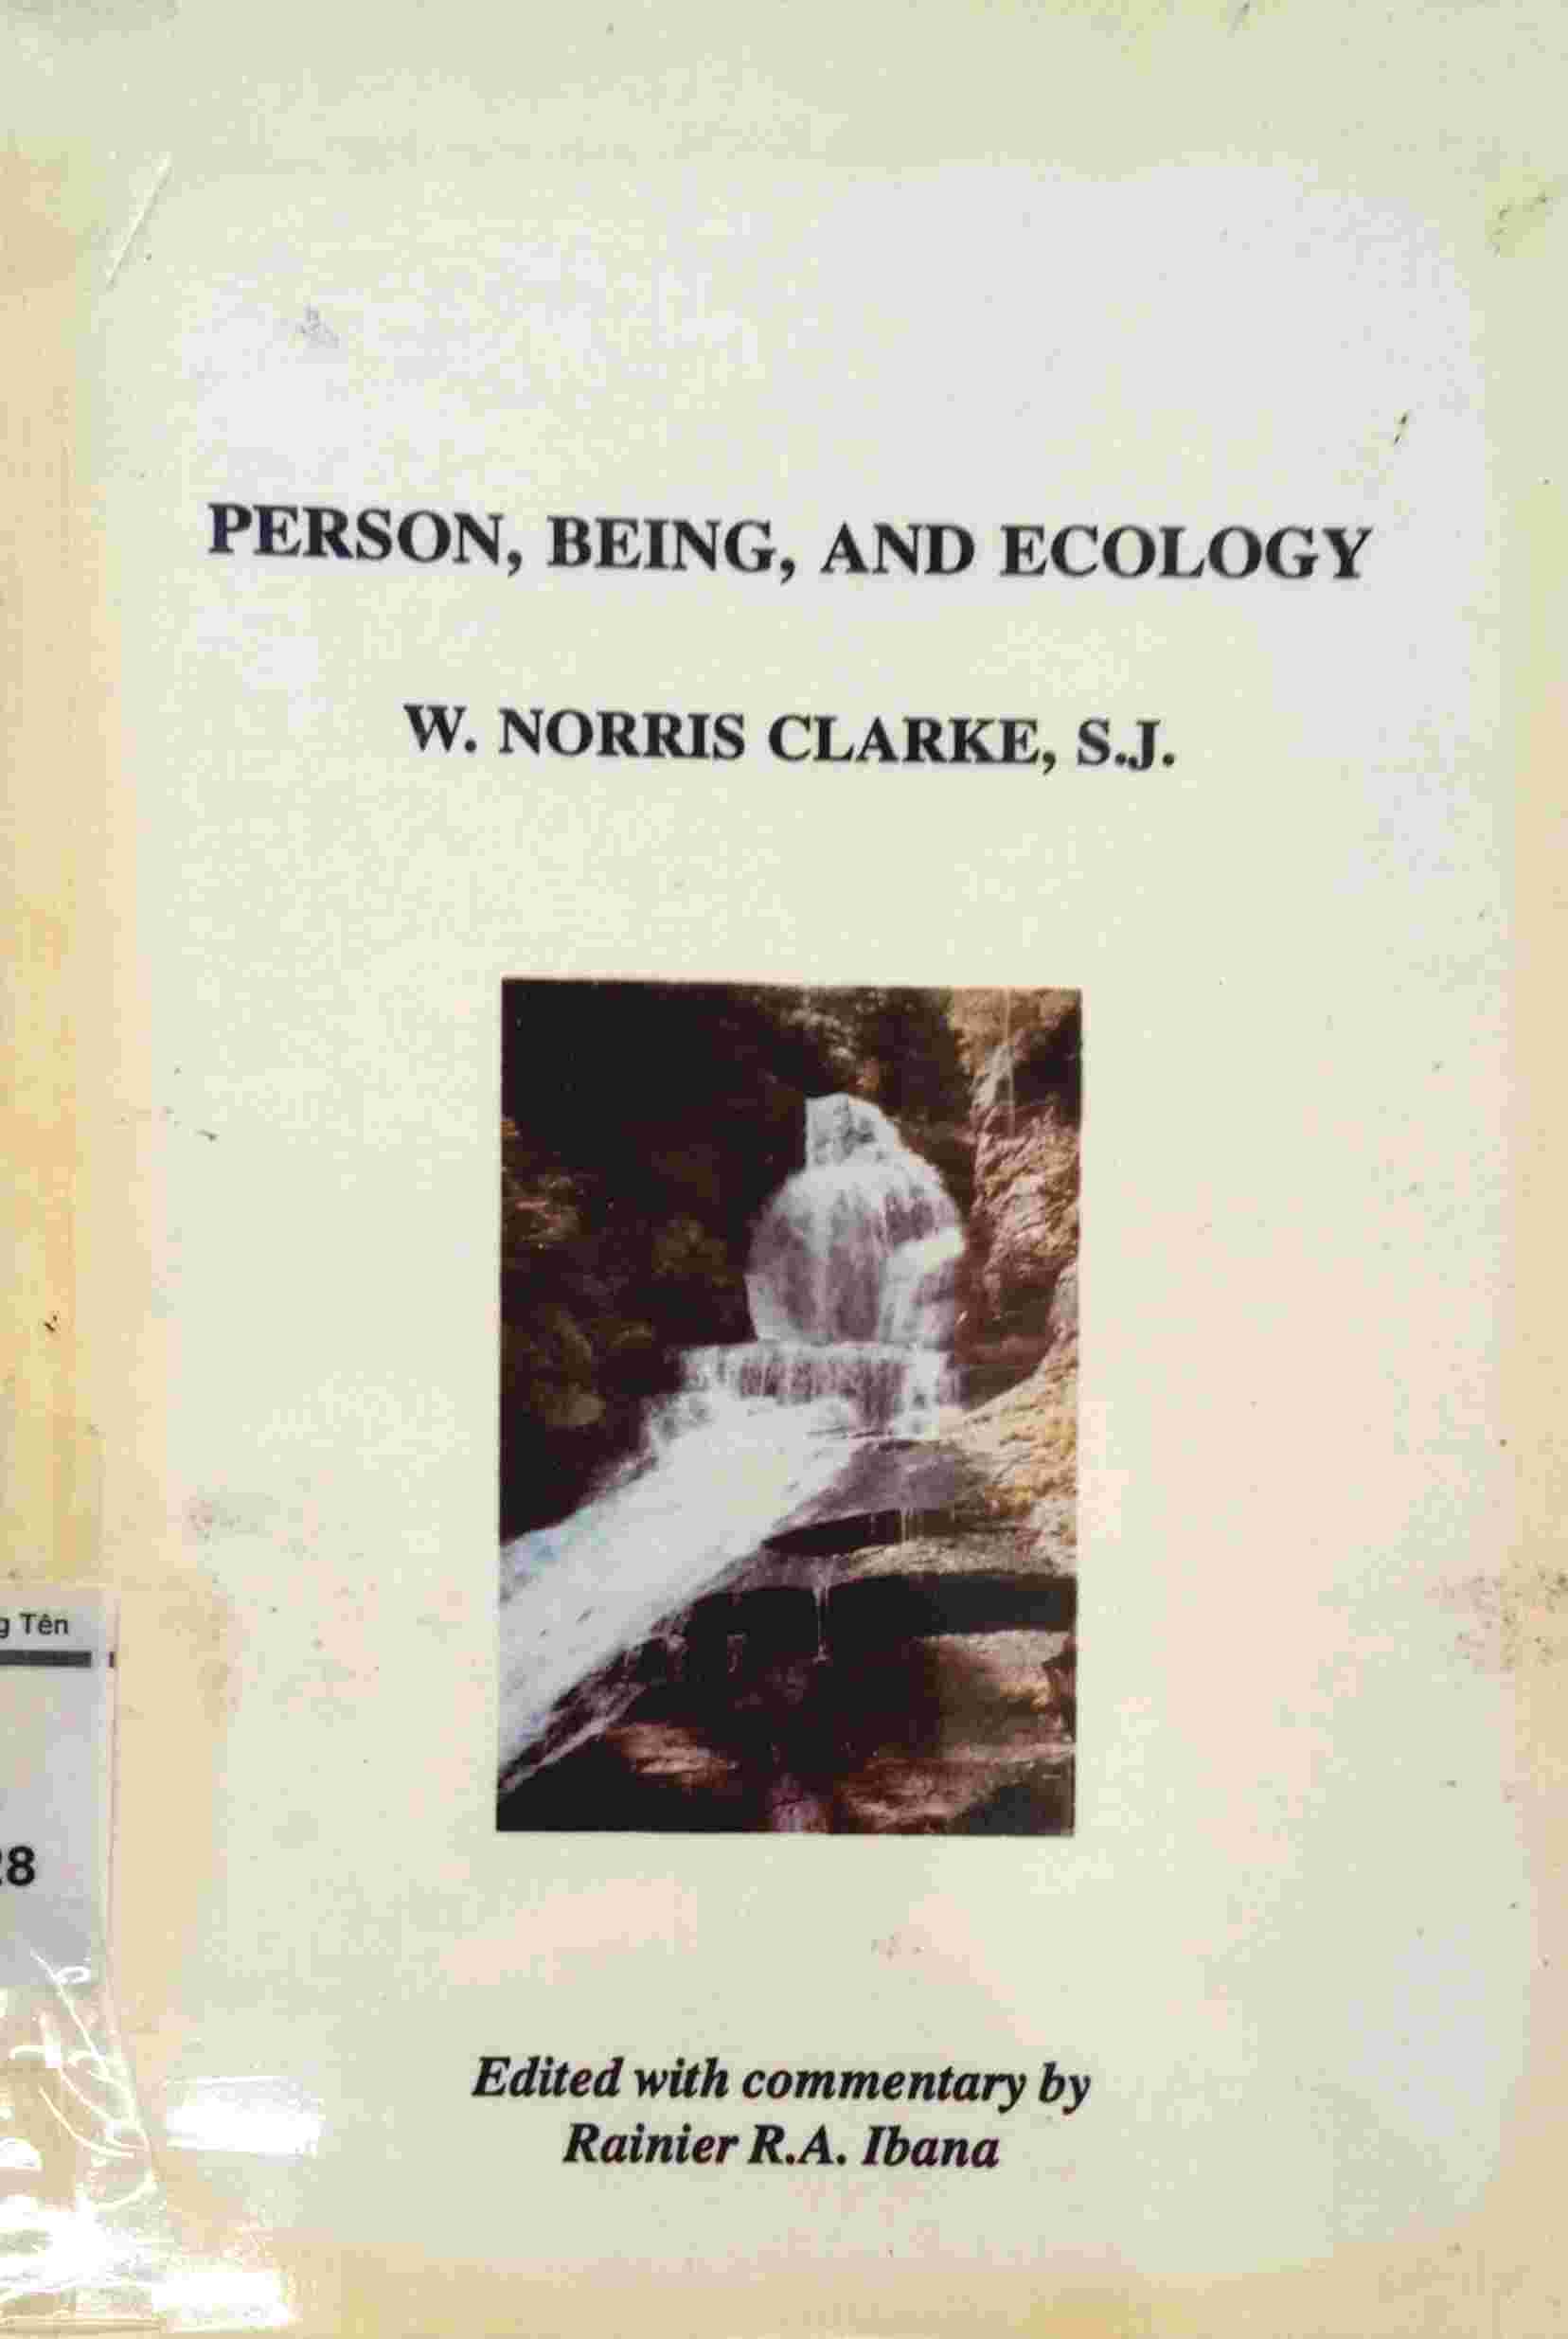 PERSON, BEING, AND ECOLOGY